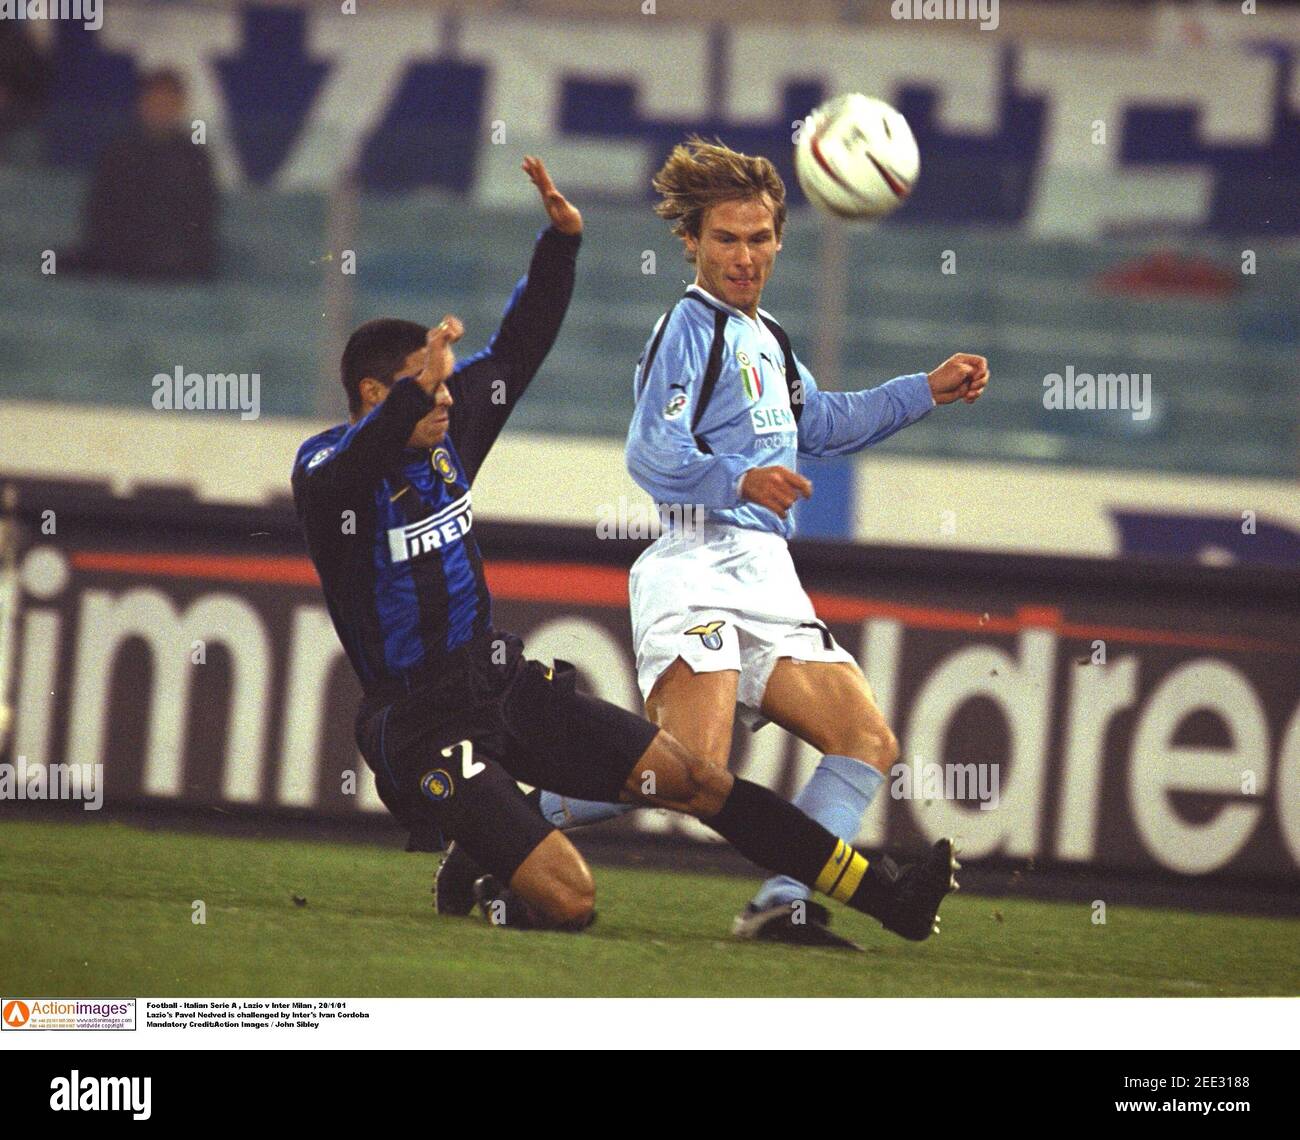 Football Italian Serie A Lazio V Inter Milan 1 01 Lazio S Pavel Nedved Is Challenged By Inter S Ivan Cordoba Mandatory Credit Action Images John Sibley Stock Photo Alamy